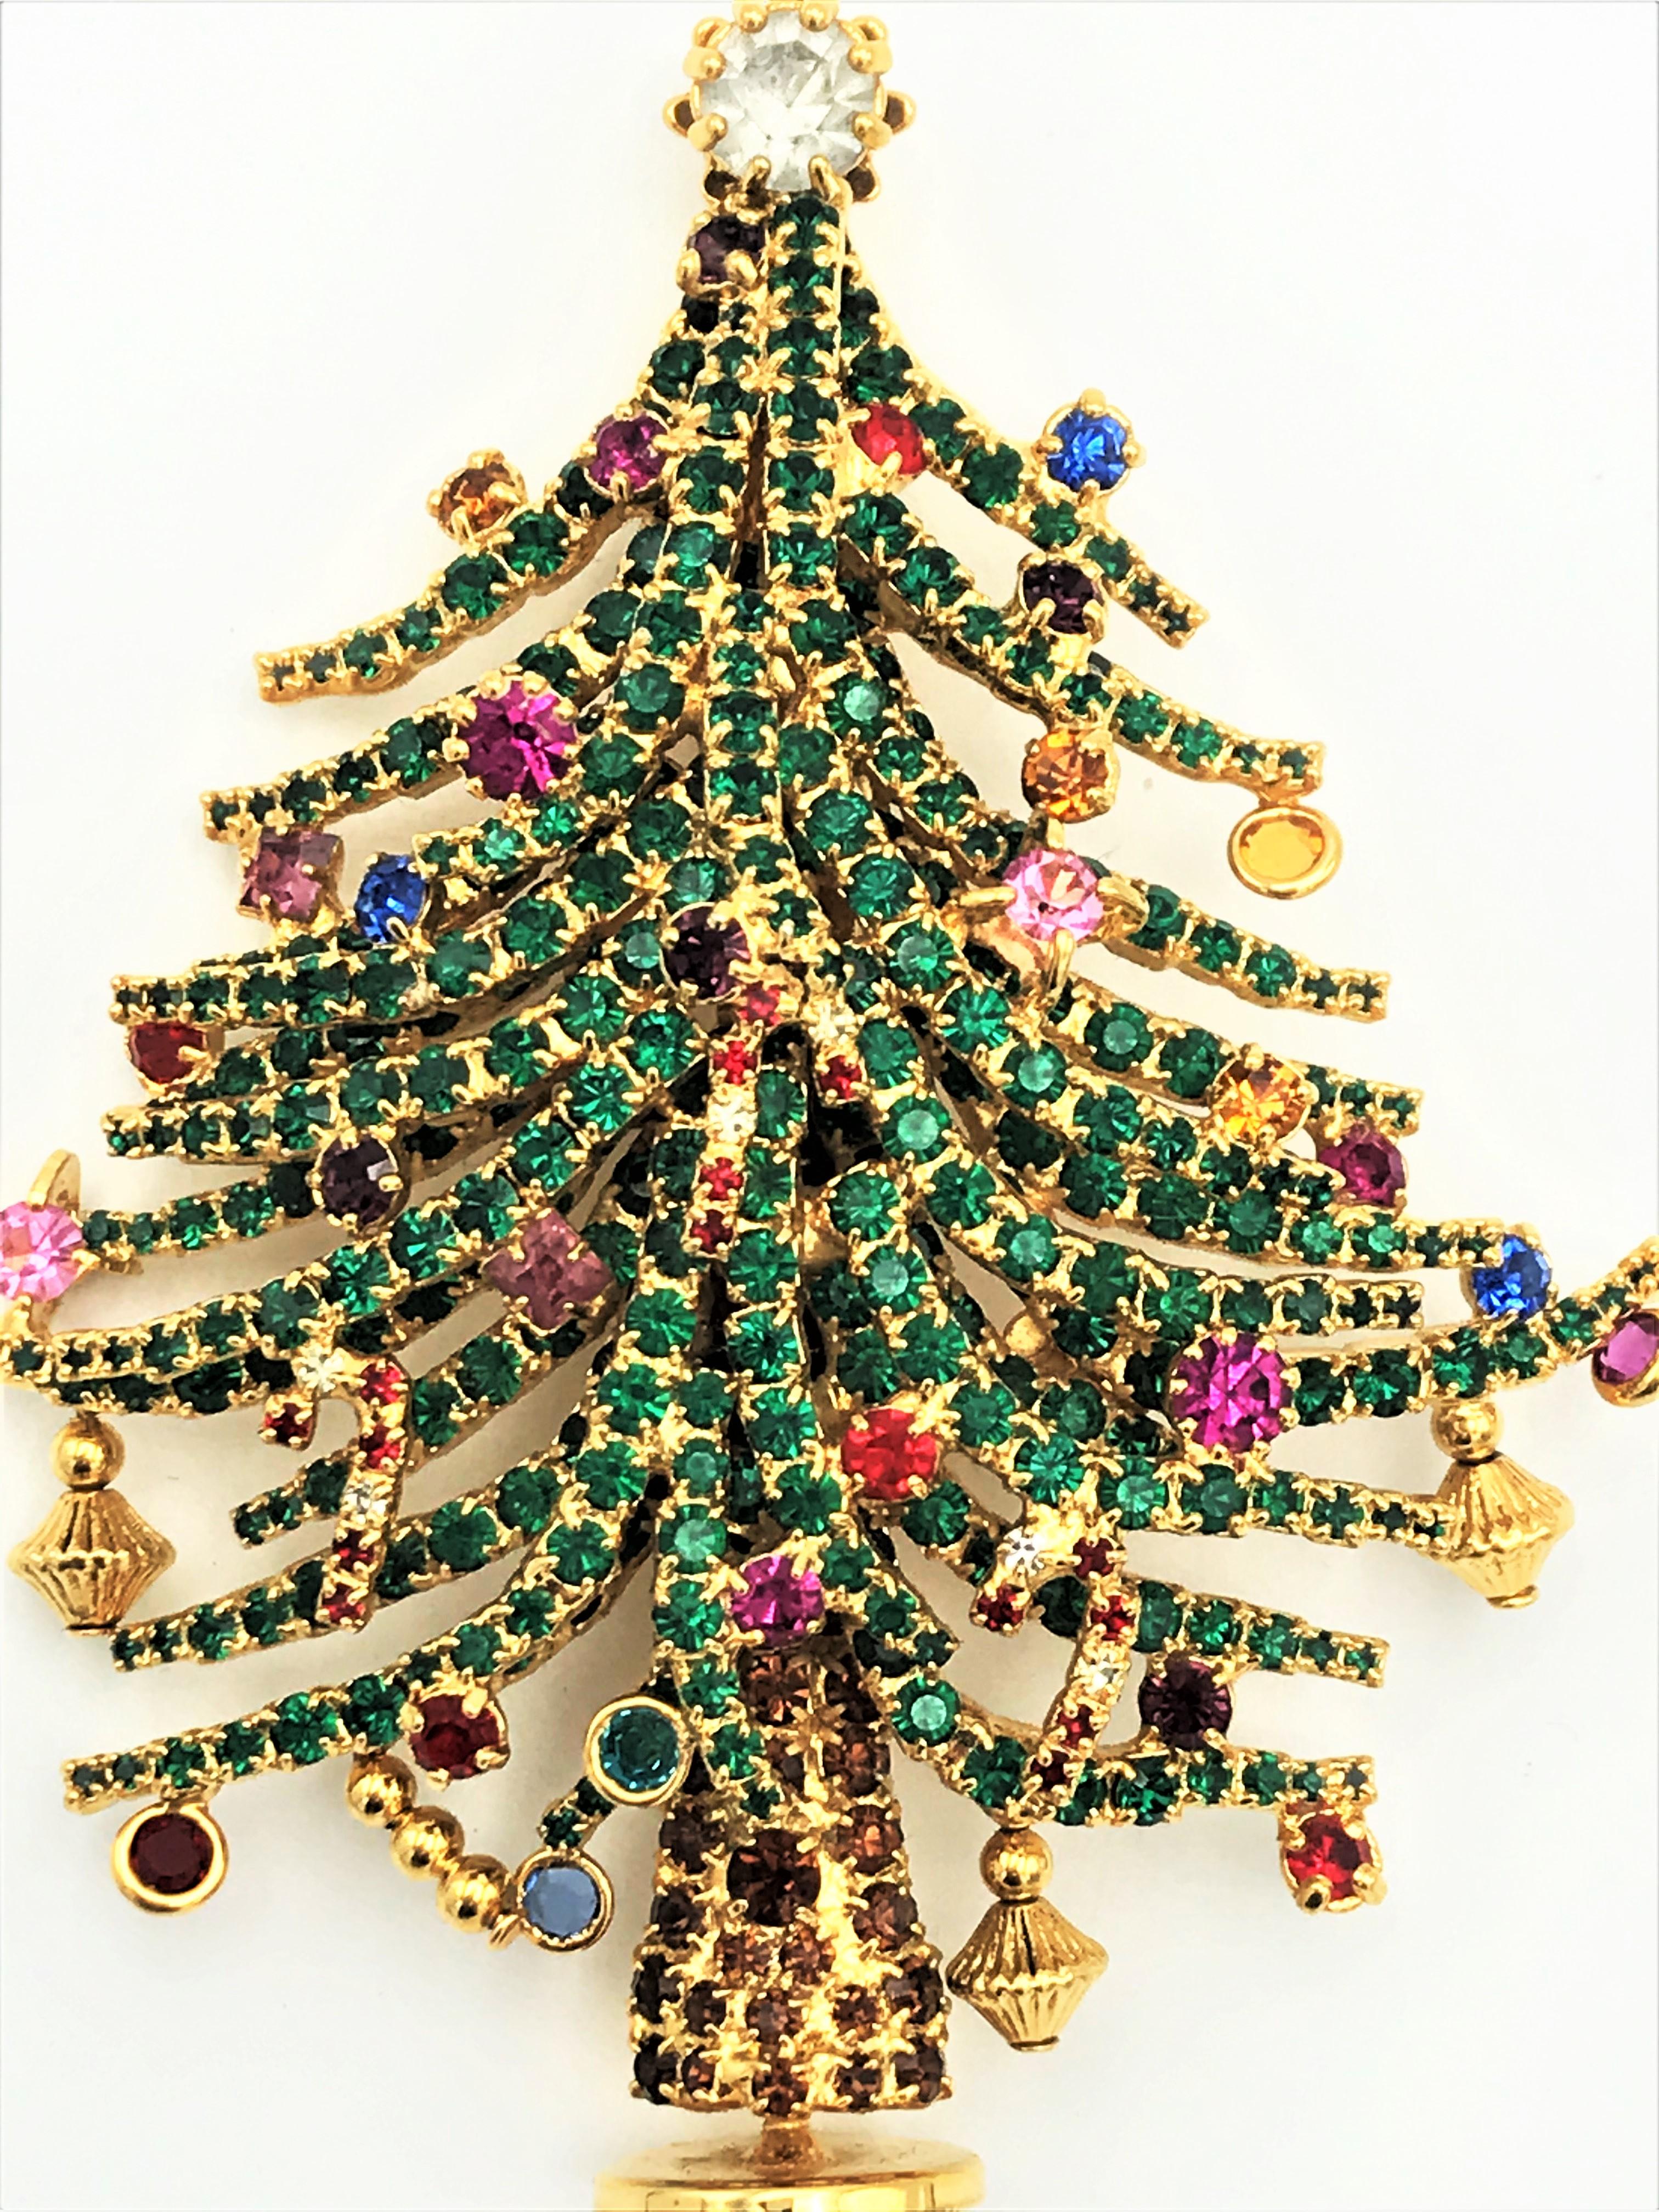 Christmas is coming soon! Who wouldn't want to adorn themselves with a Christmas tree brooch or, in this case, place them on the Christmas-decorated shelf?
This  sparkling treasure is designed and manufactured in California by Dorothy Bauer. She